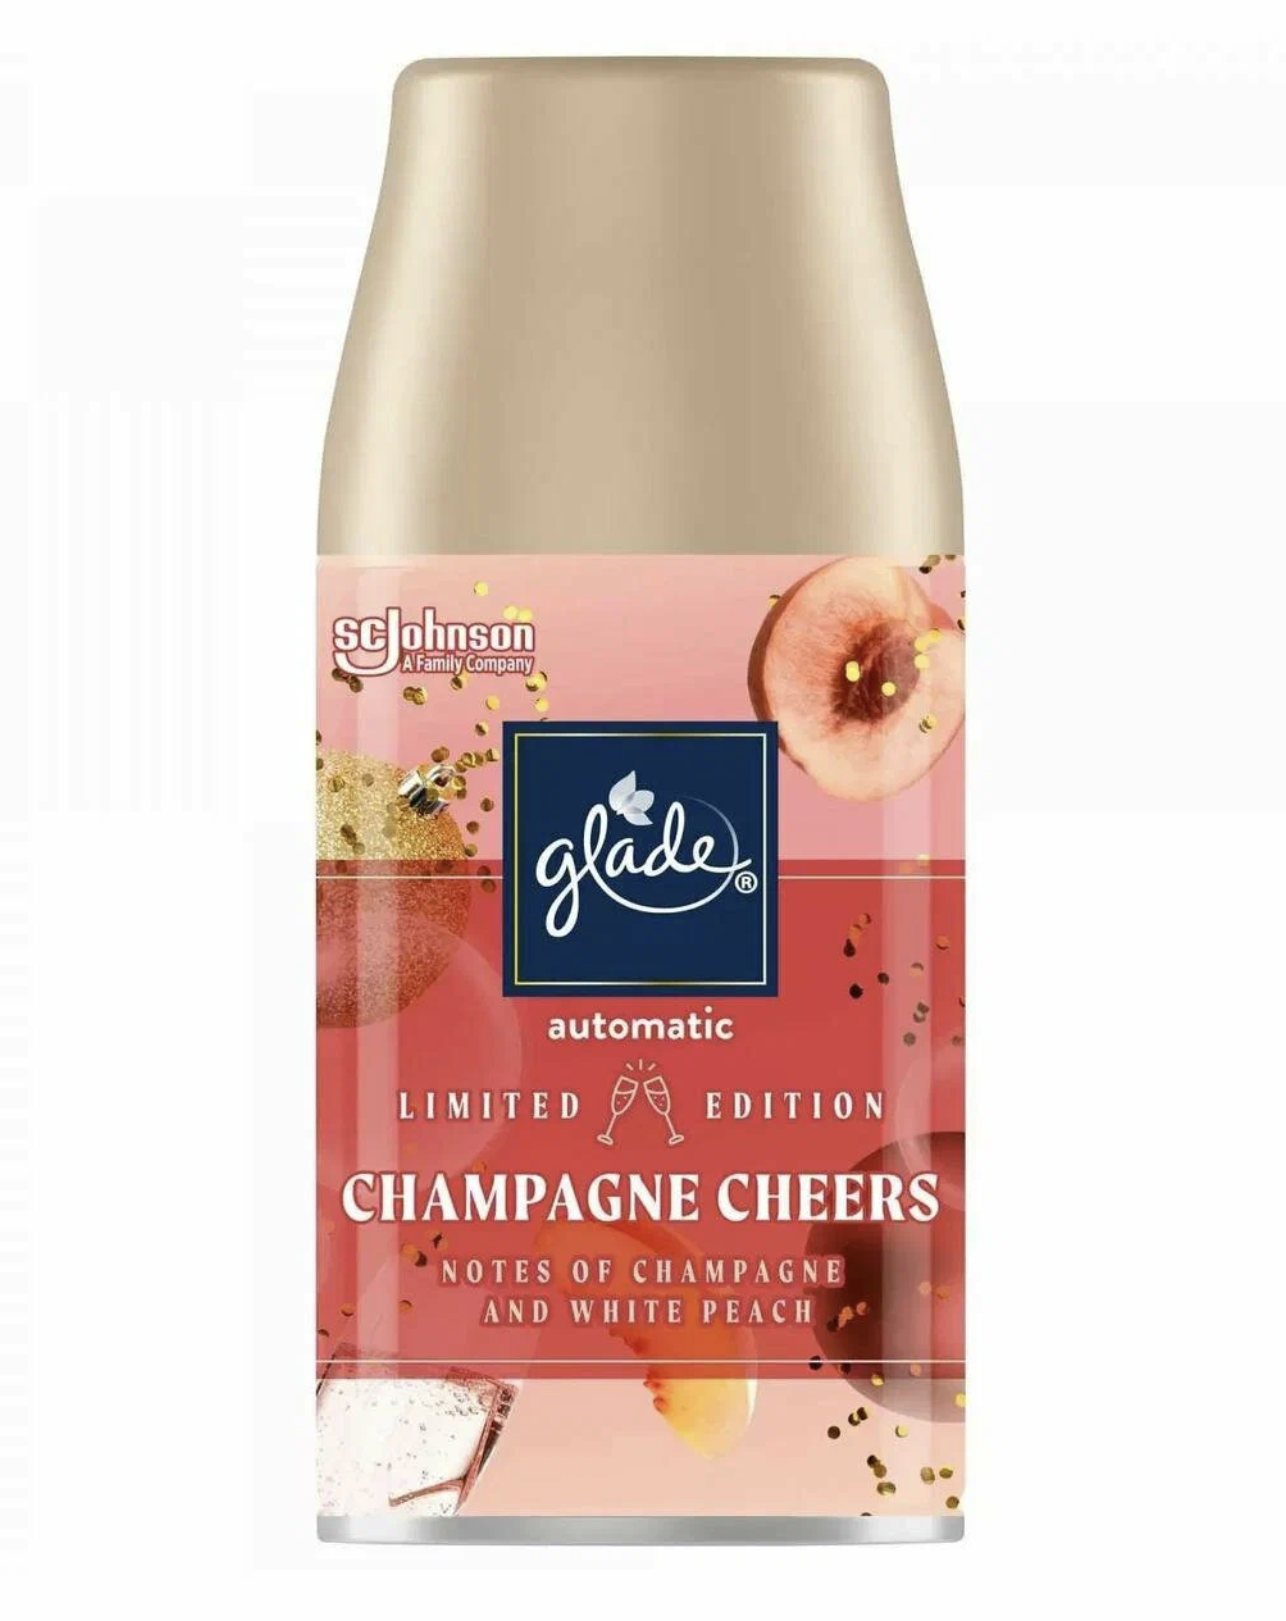   / Glade Automatic Limited Edition -   Champagne Cheers, 269 